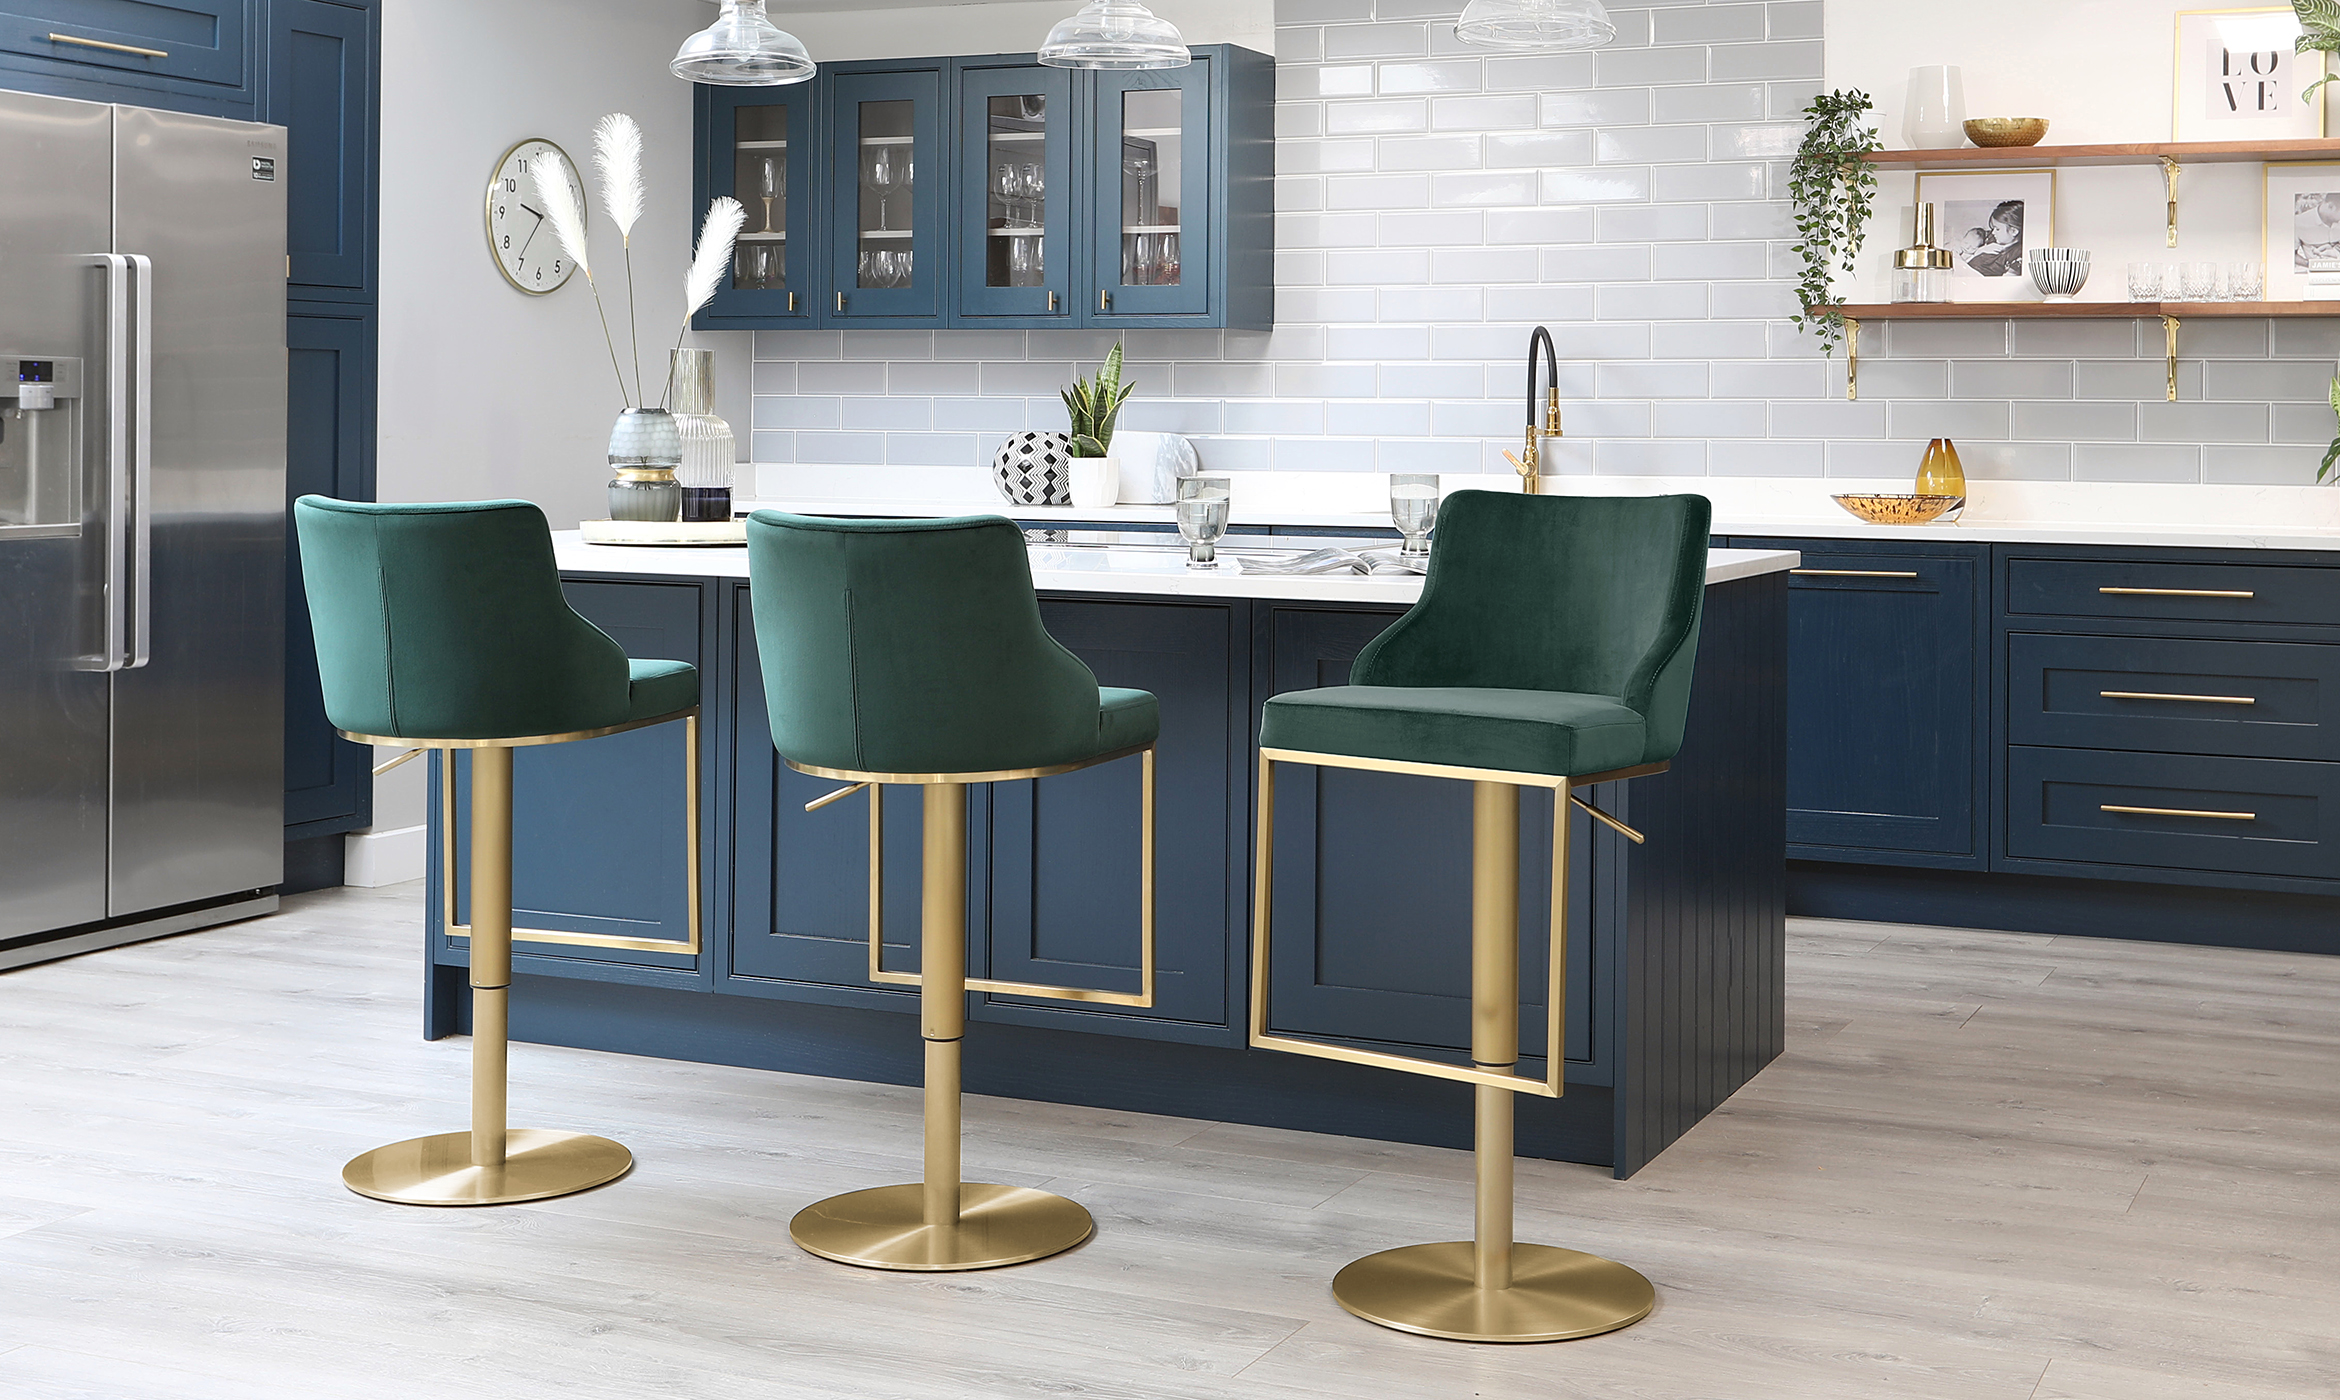 Brass Gas Lift Bar Stool, How To Order Bar Stools